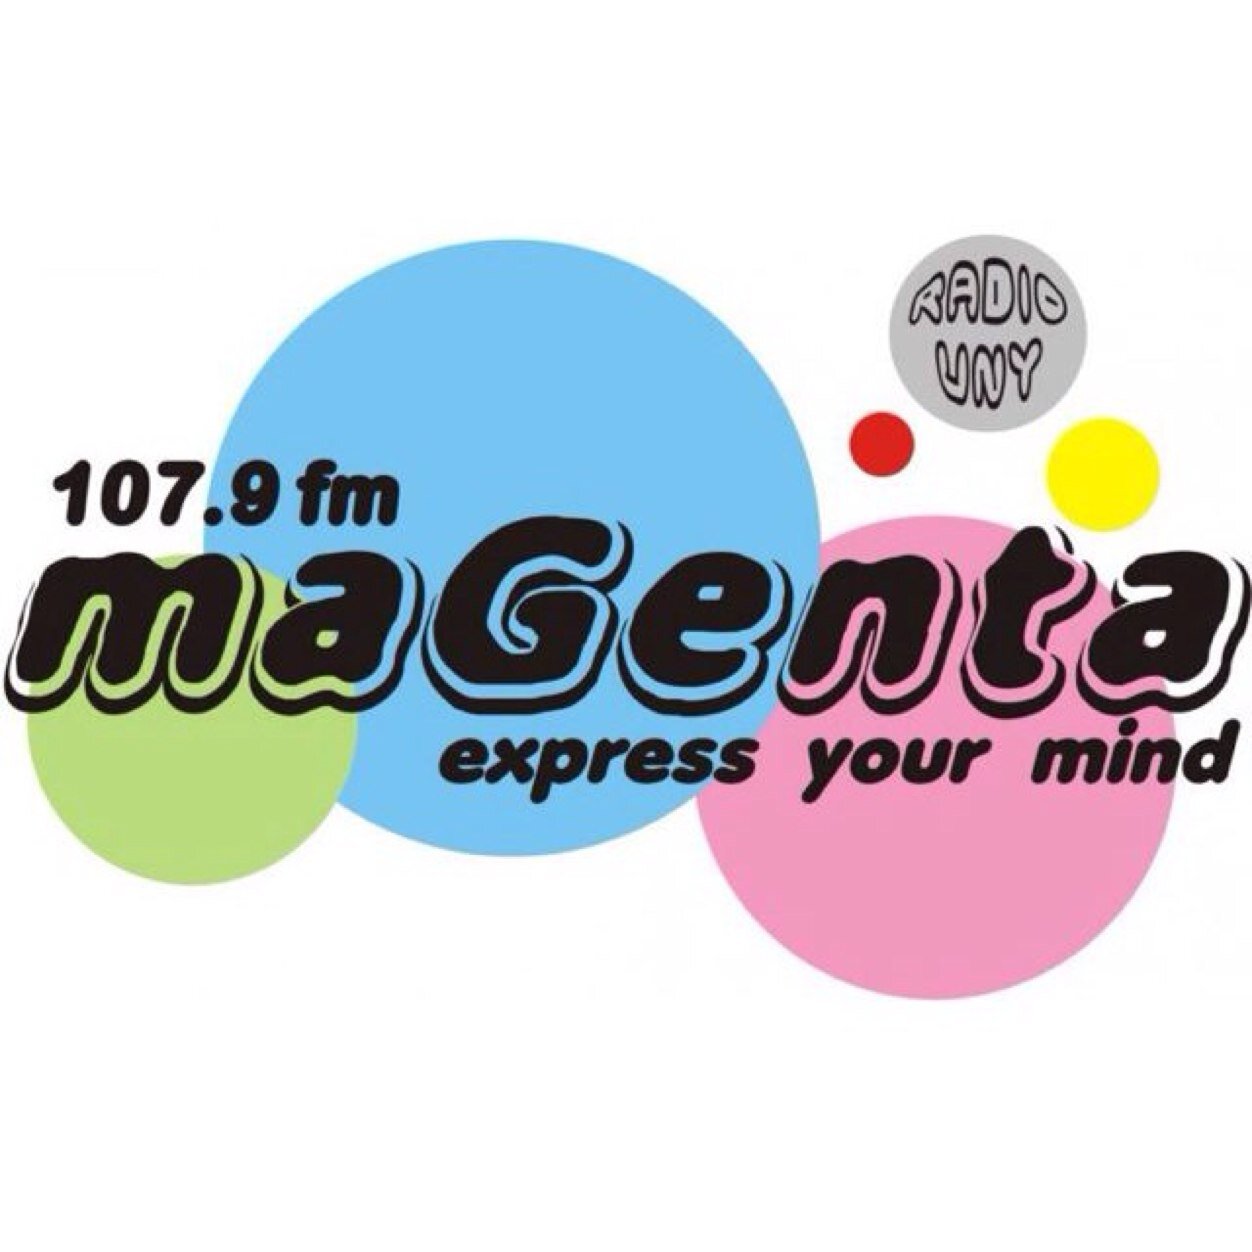 107.9 FM Magenta Radio Express Your Mind! Streaming us on https://t.co/XYtPyYcT7U. For Media Partner please contact 087881691828 (Ryda)